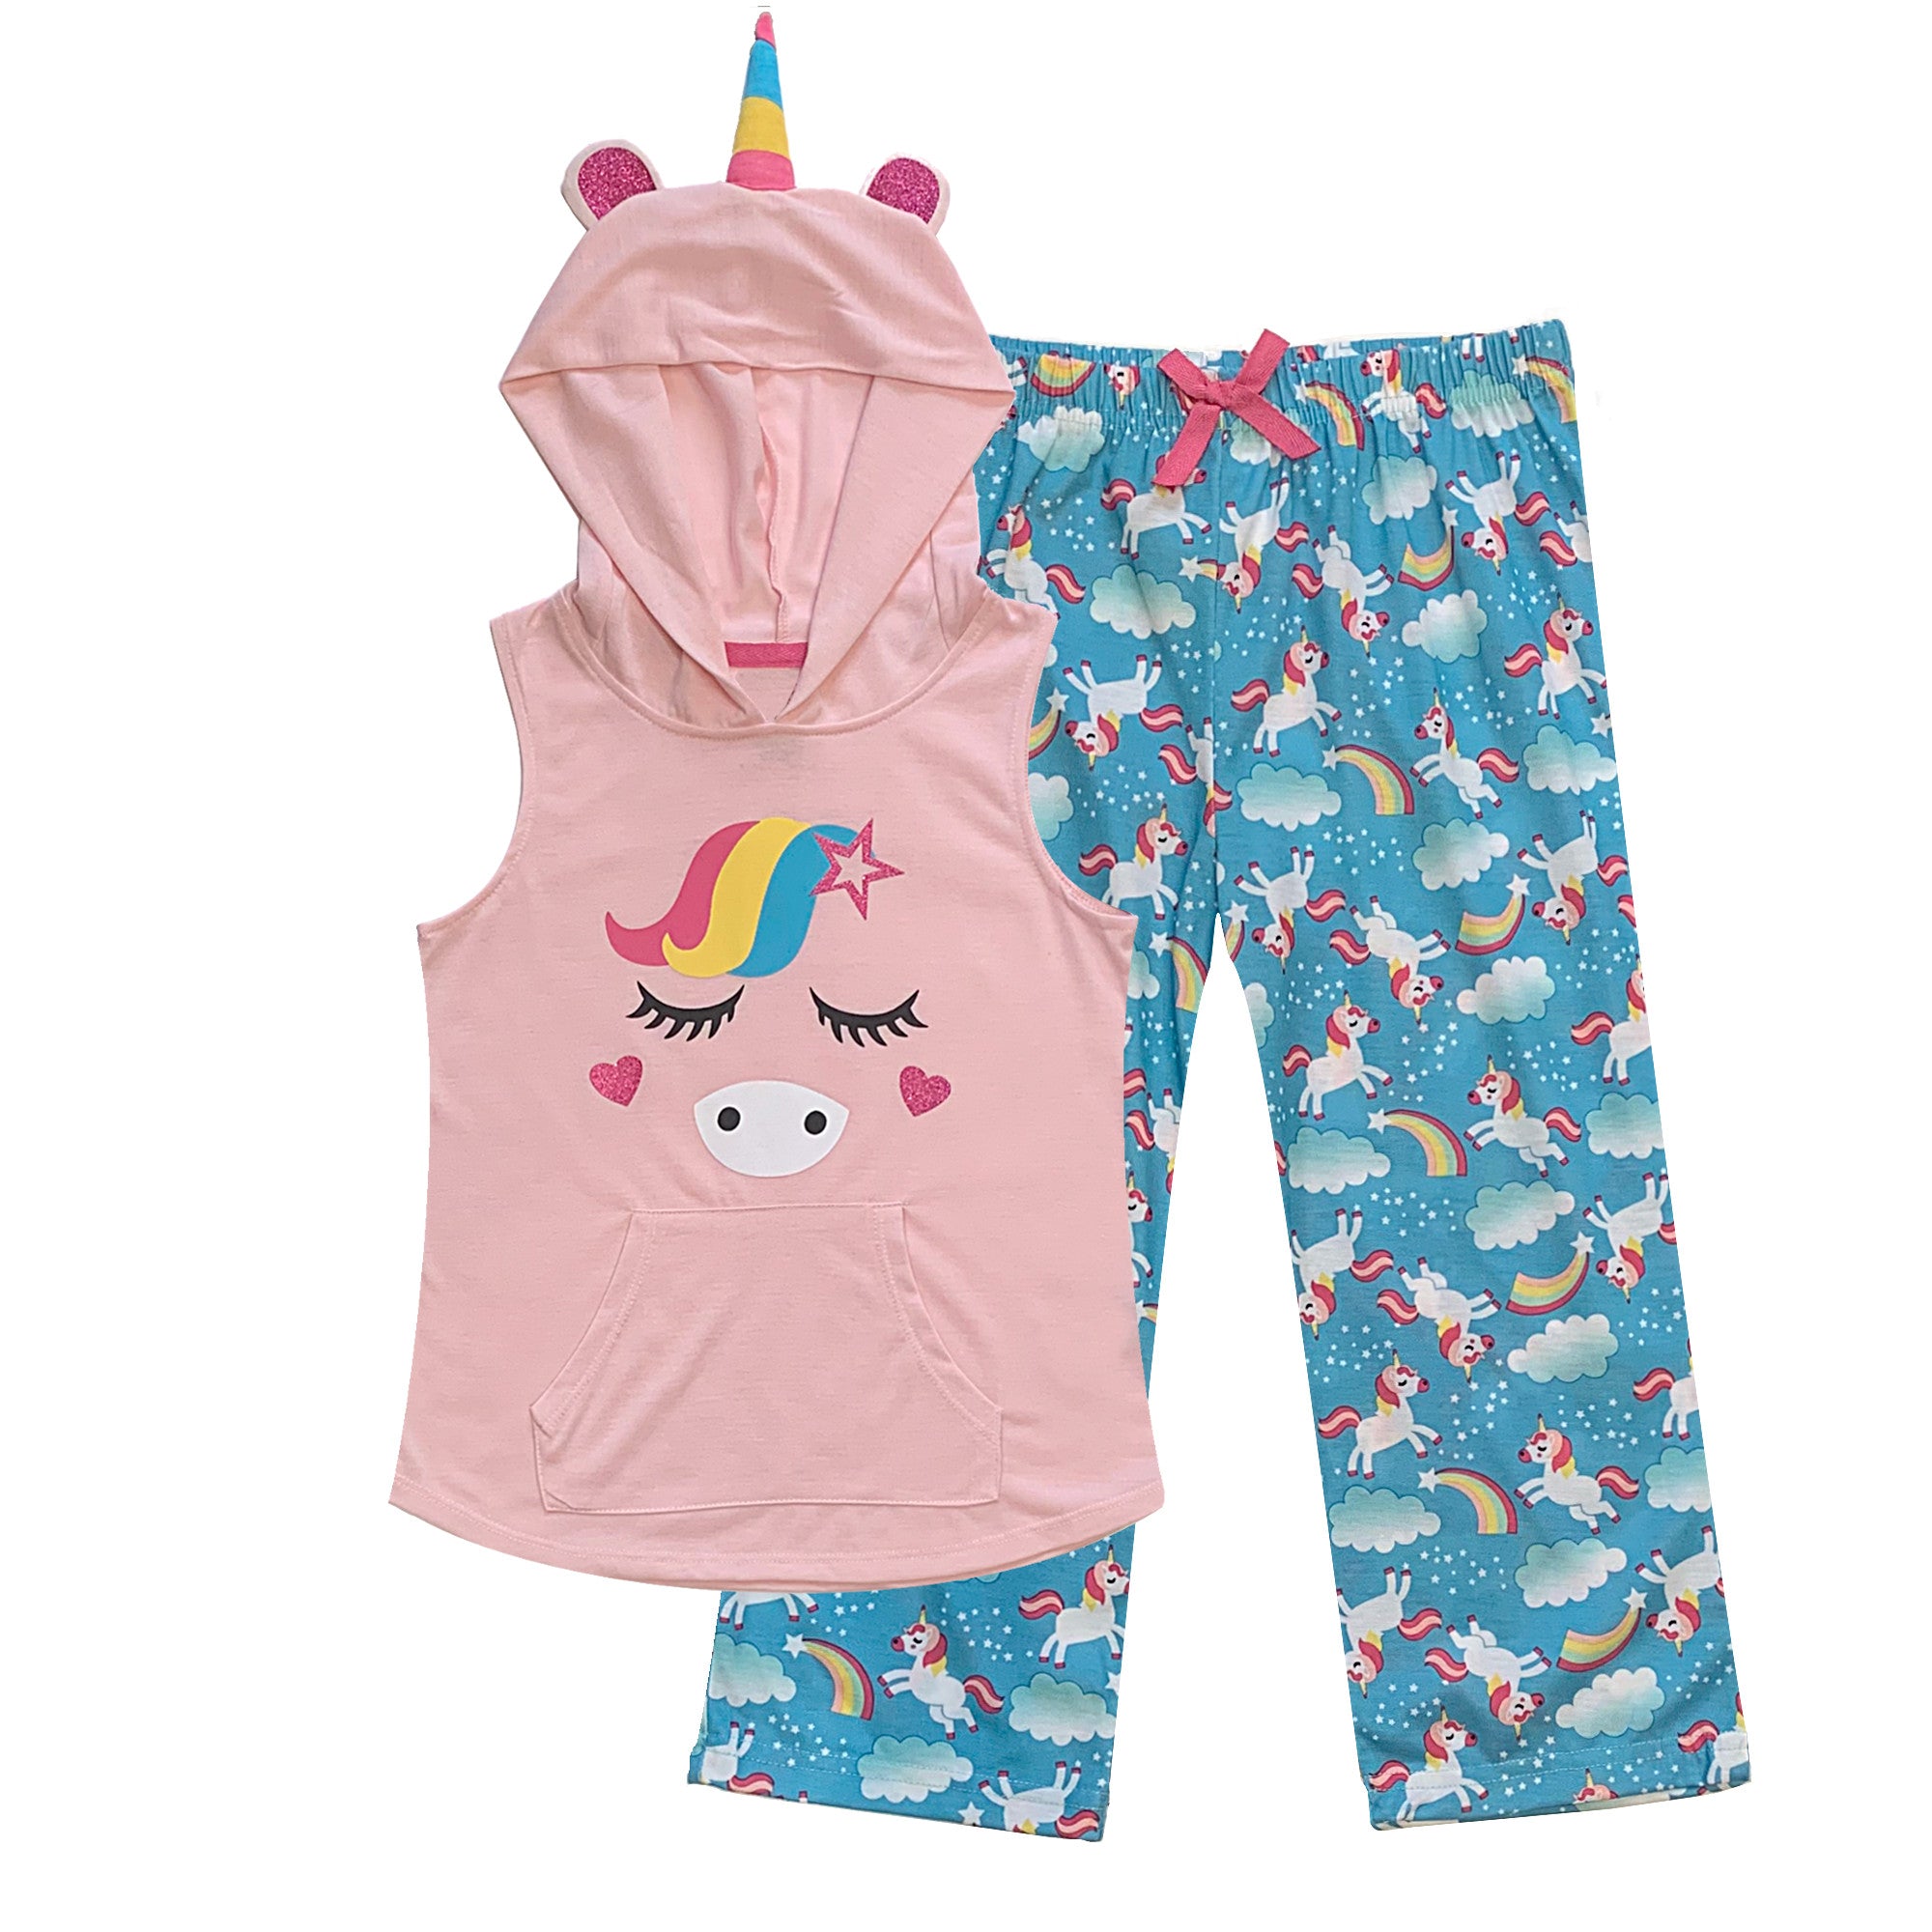 Popular Girl's Hooded Sleeveless Top and Bottoms - 2pc Pajama Matching Set